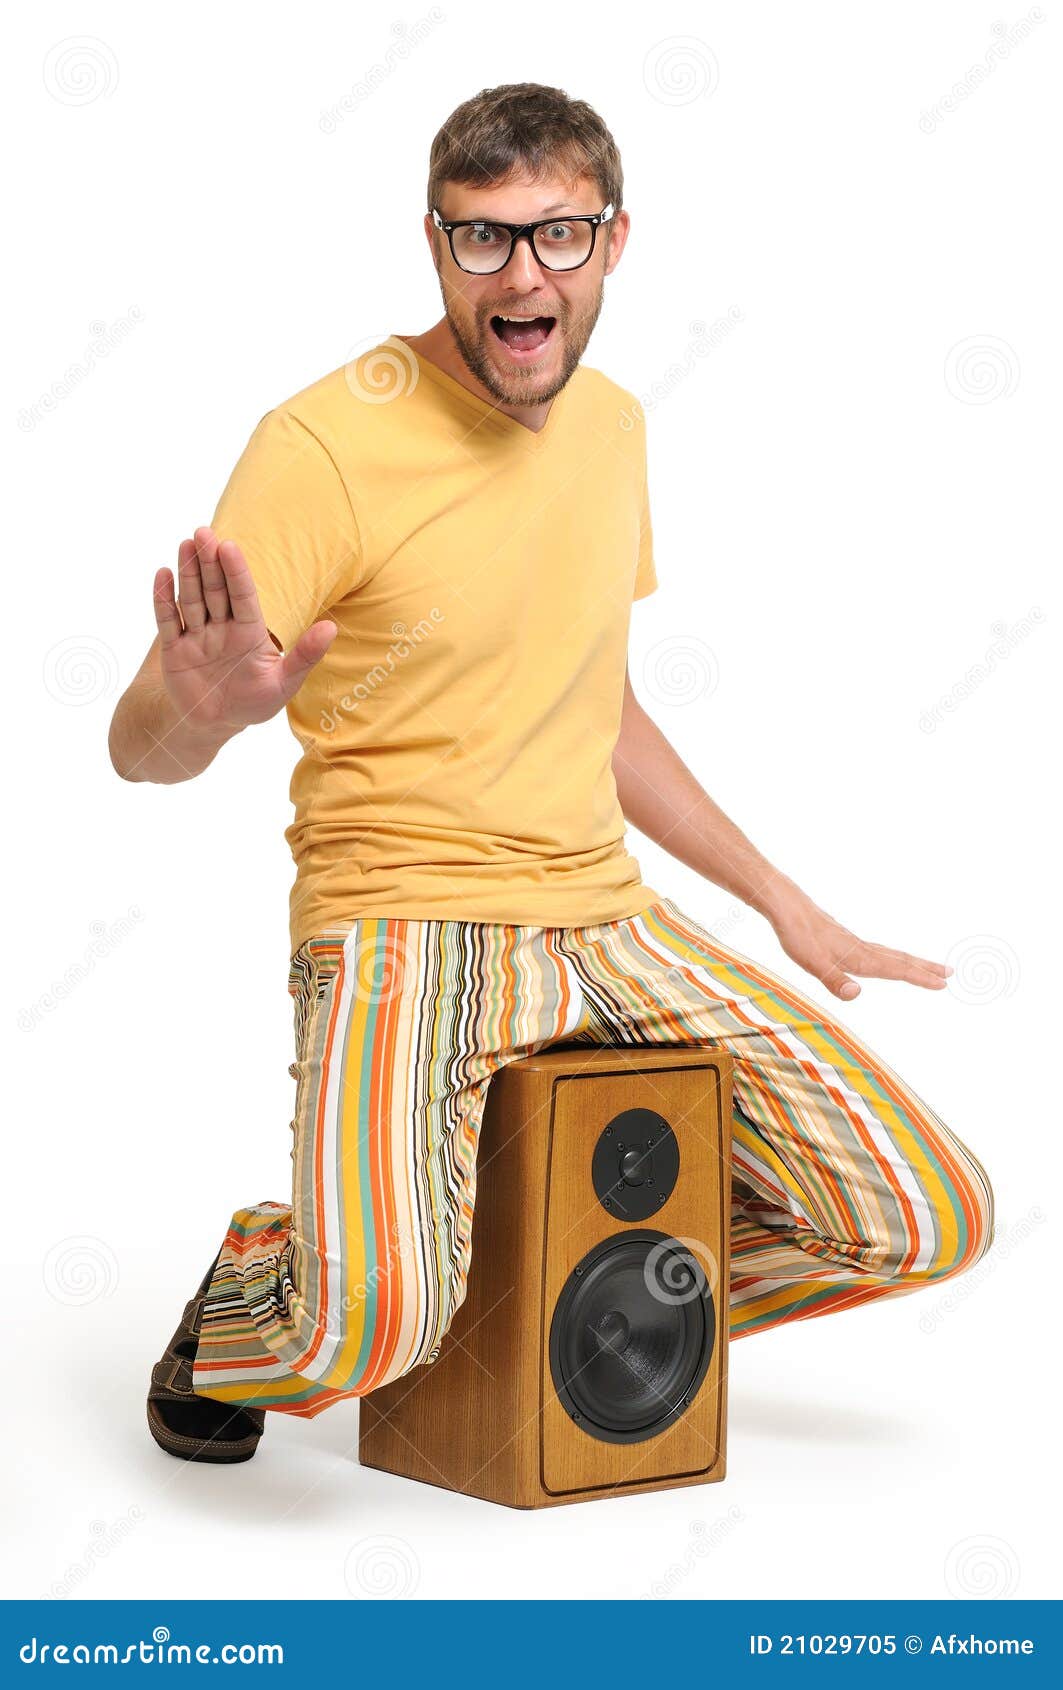 cool funny dude dancing on the speaker